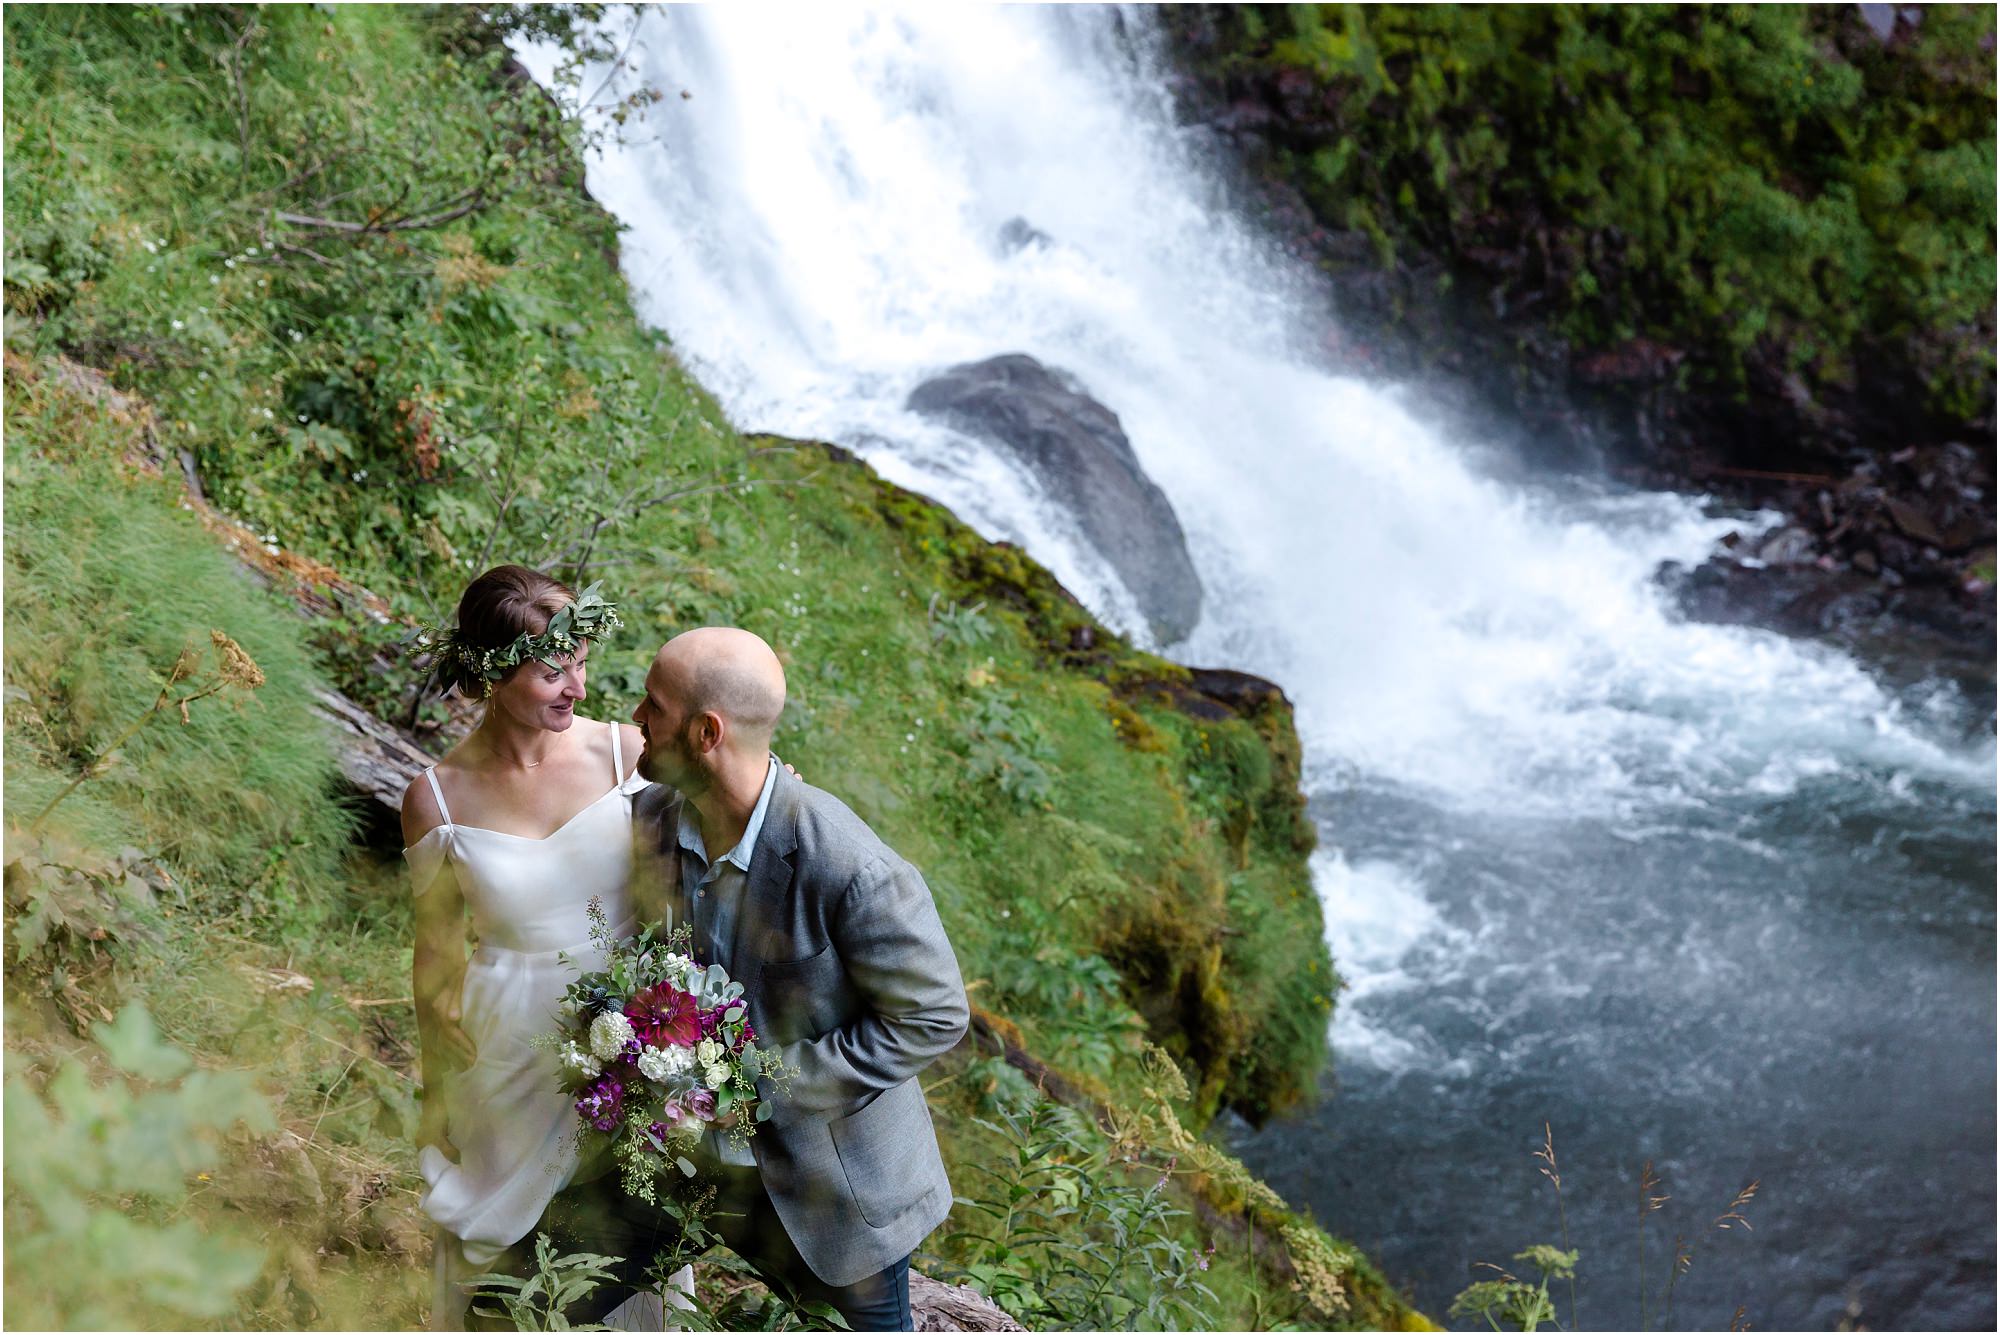 Tumalo Creek rages down the base of the waterfall as a bride wearing a floral crown looks at her groom carrying her bouquet of roses, dahlias and eucalyptus after their Bend Oregon elopement. | Erica Swantek Photography 